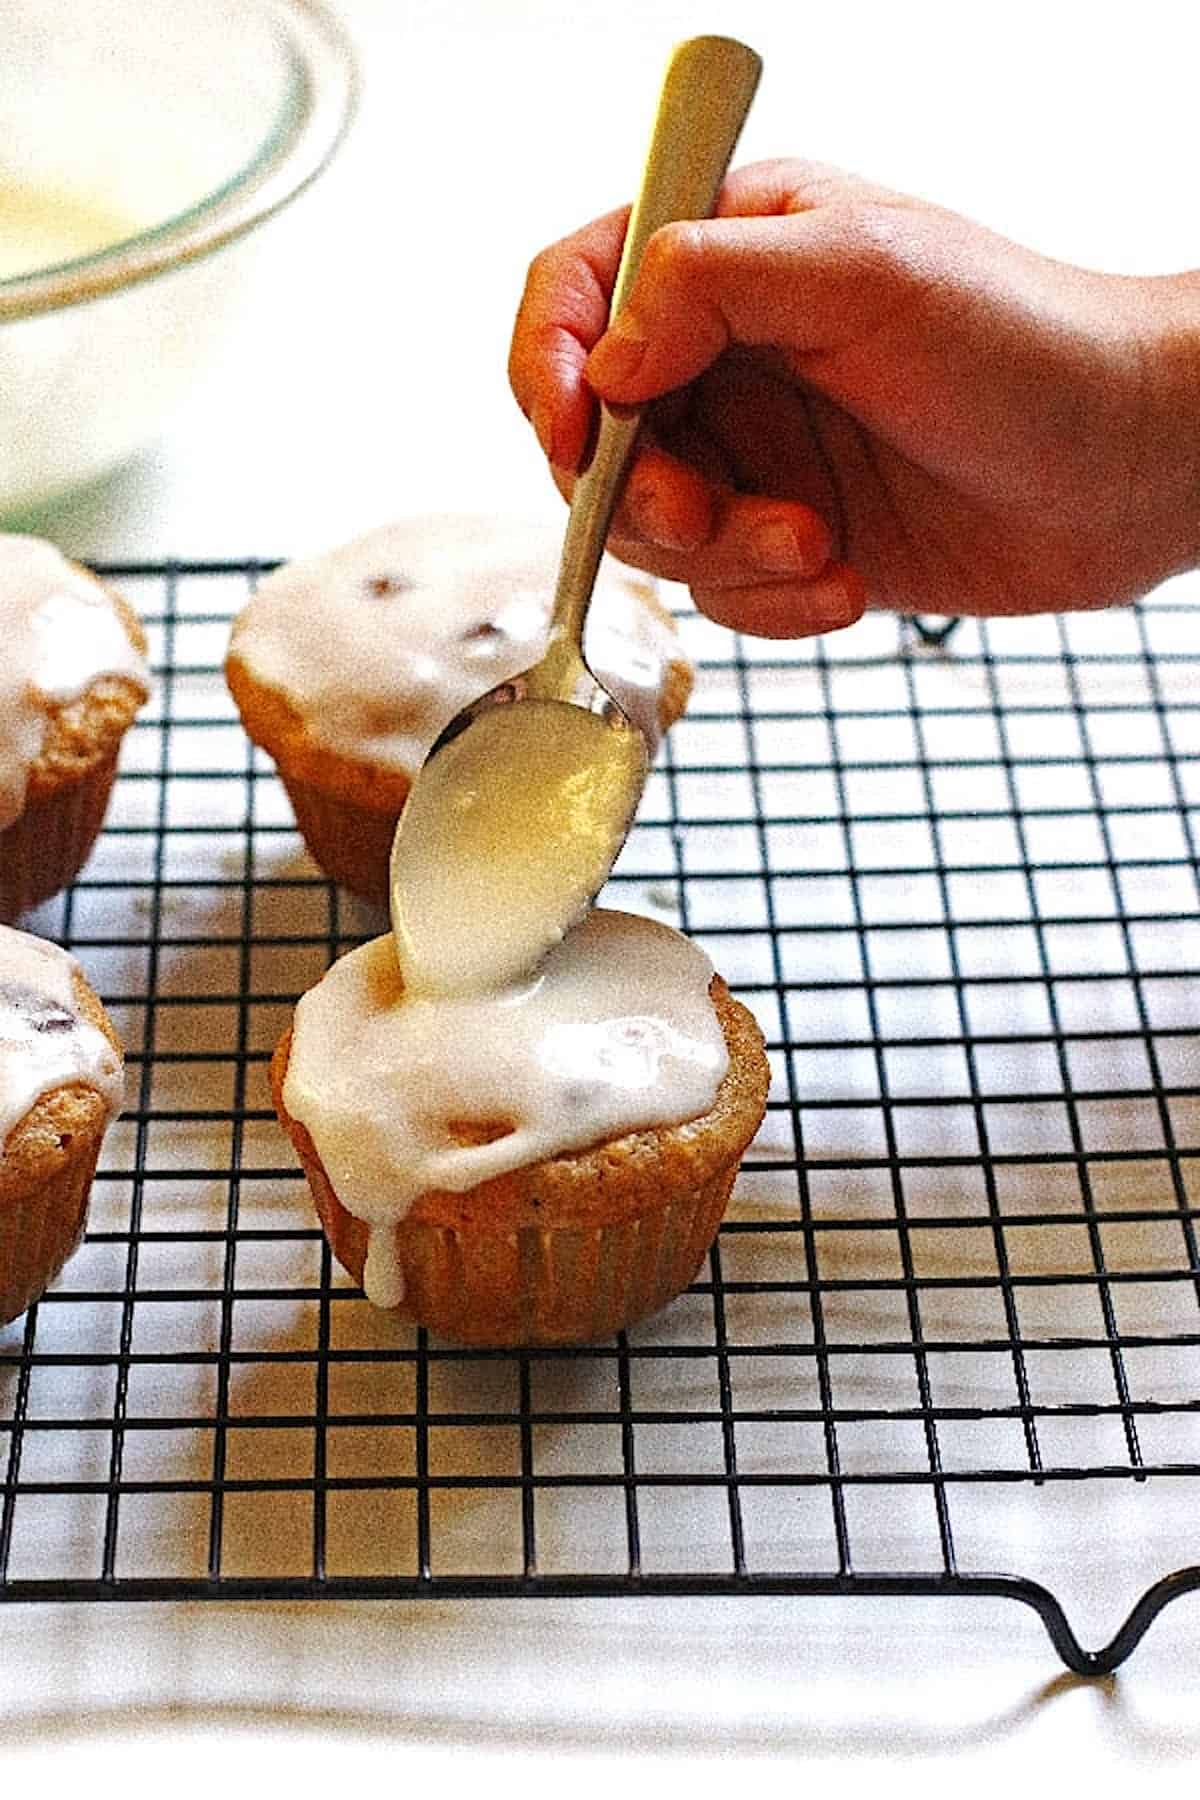 Using the back of a spoon to spread the glaze around on a muffin